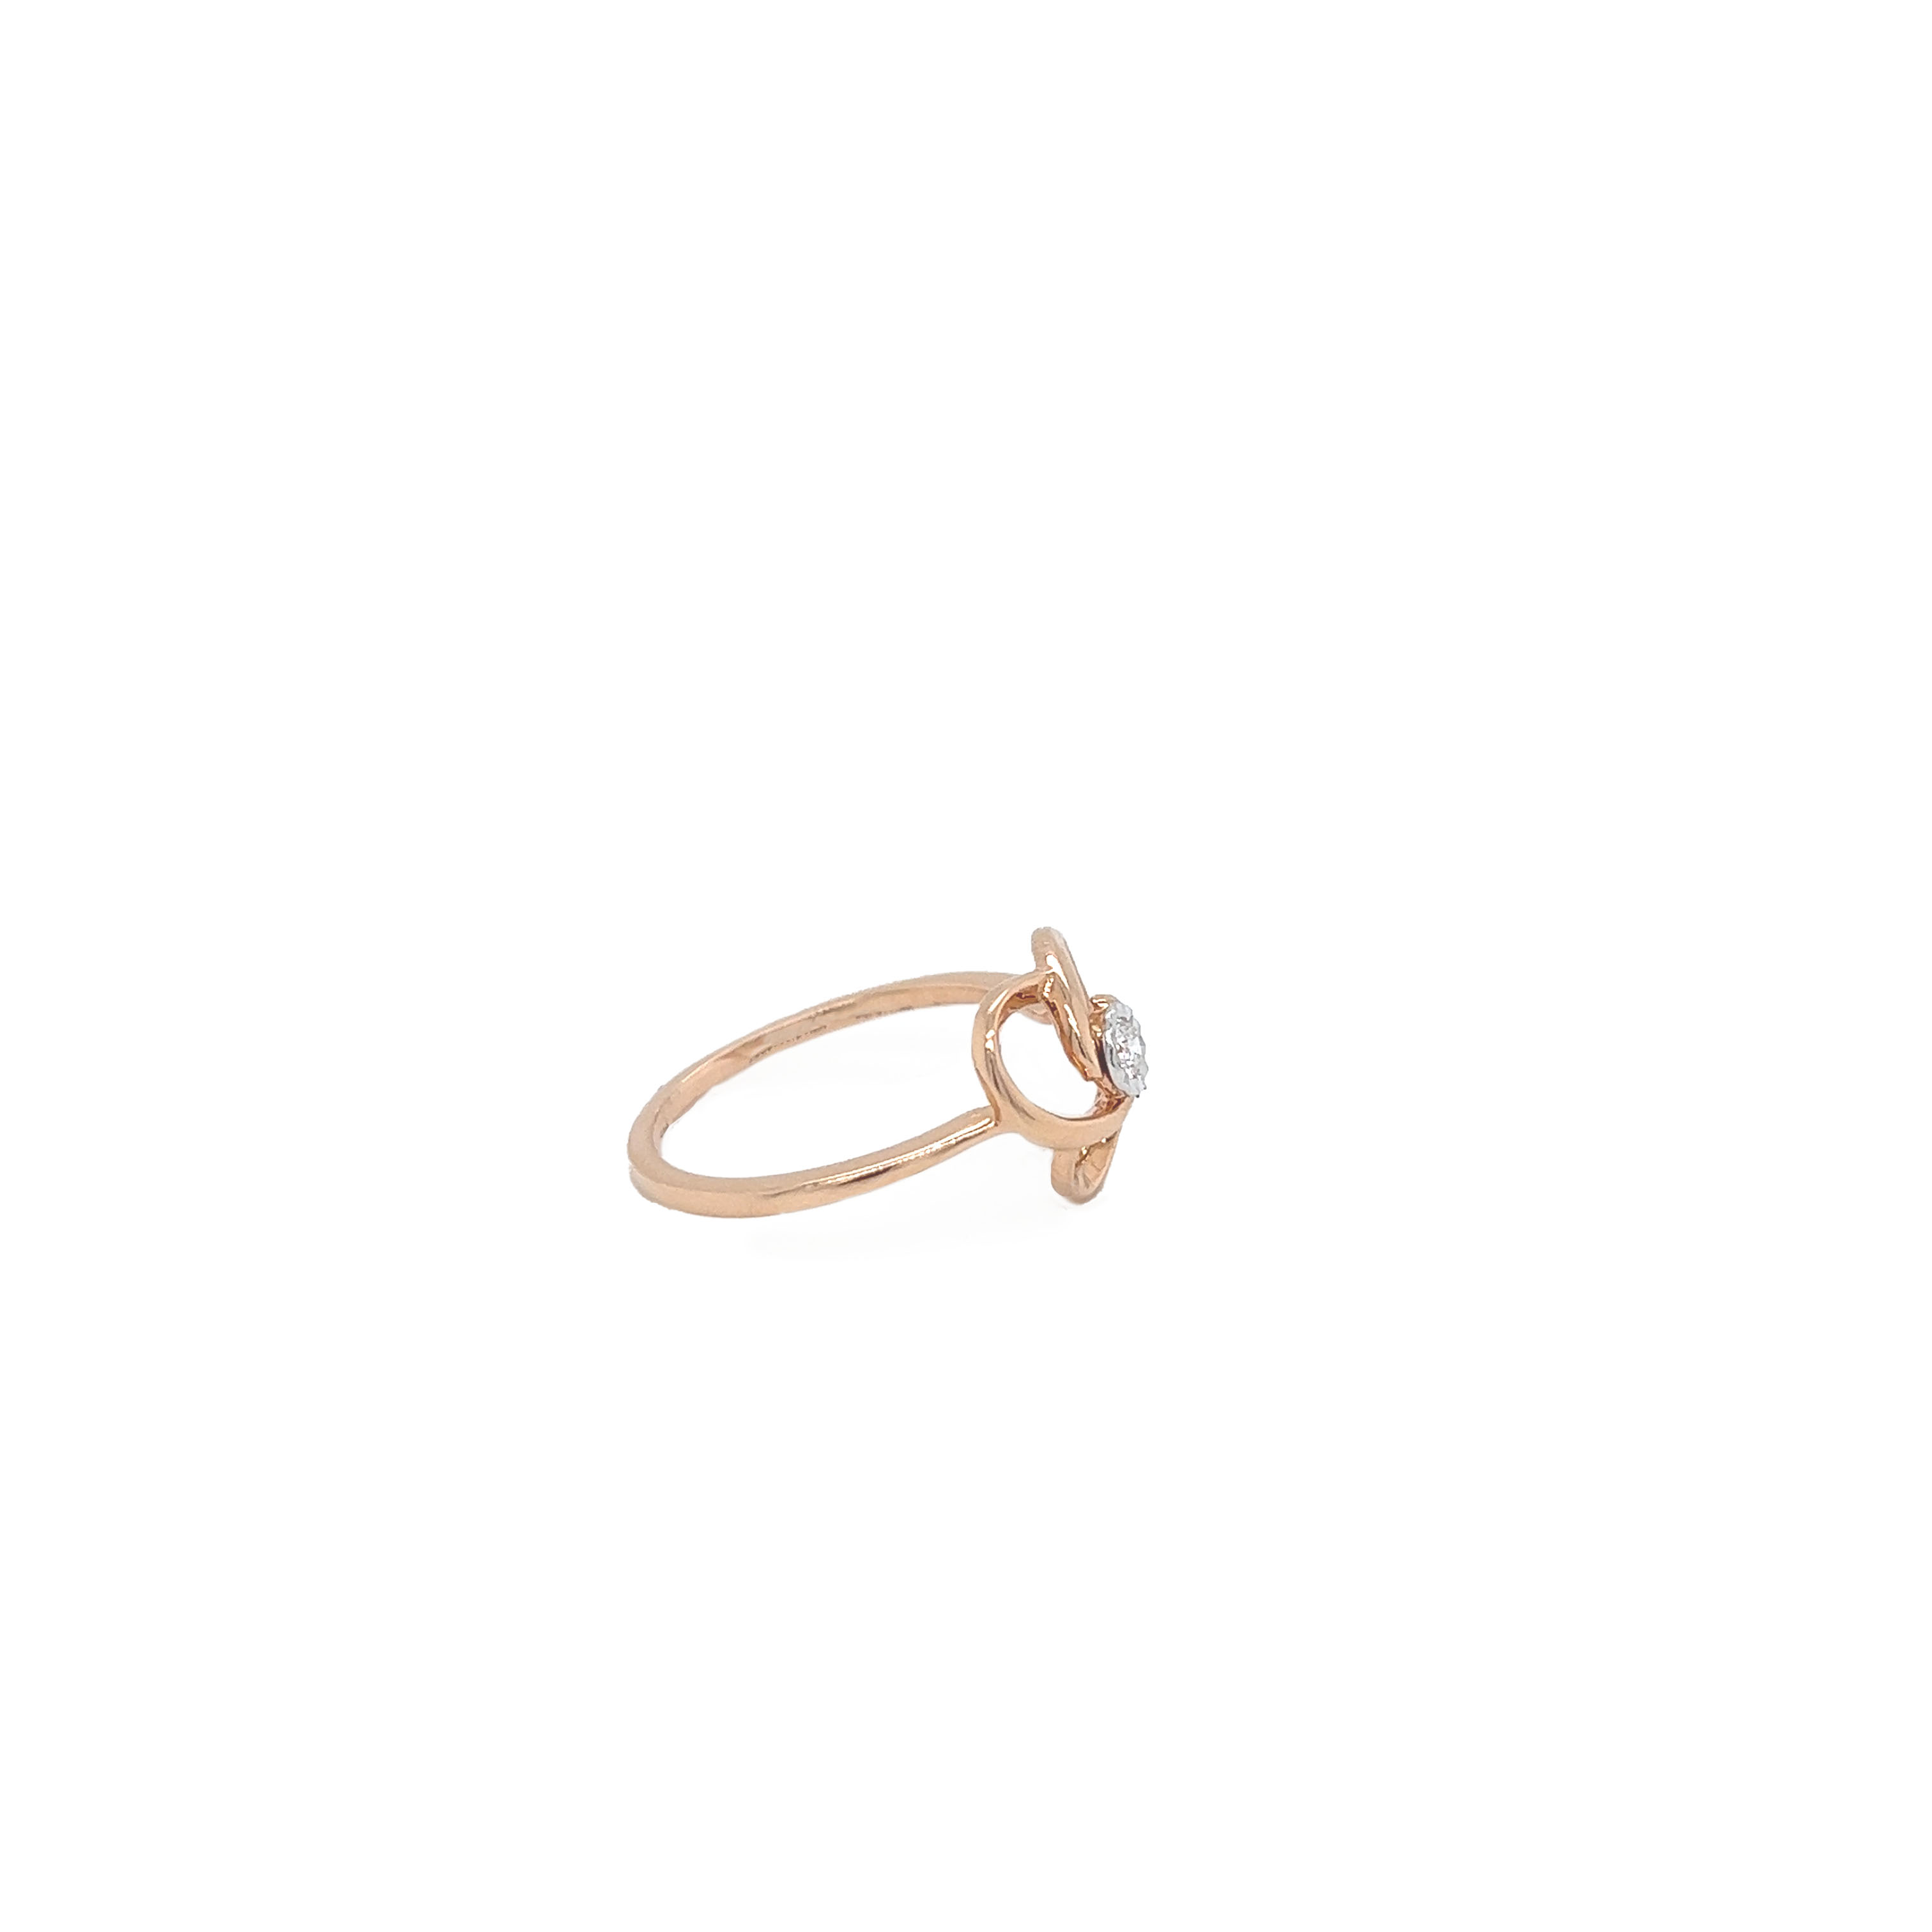 18k gold  And Diamond  ring